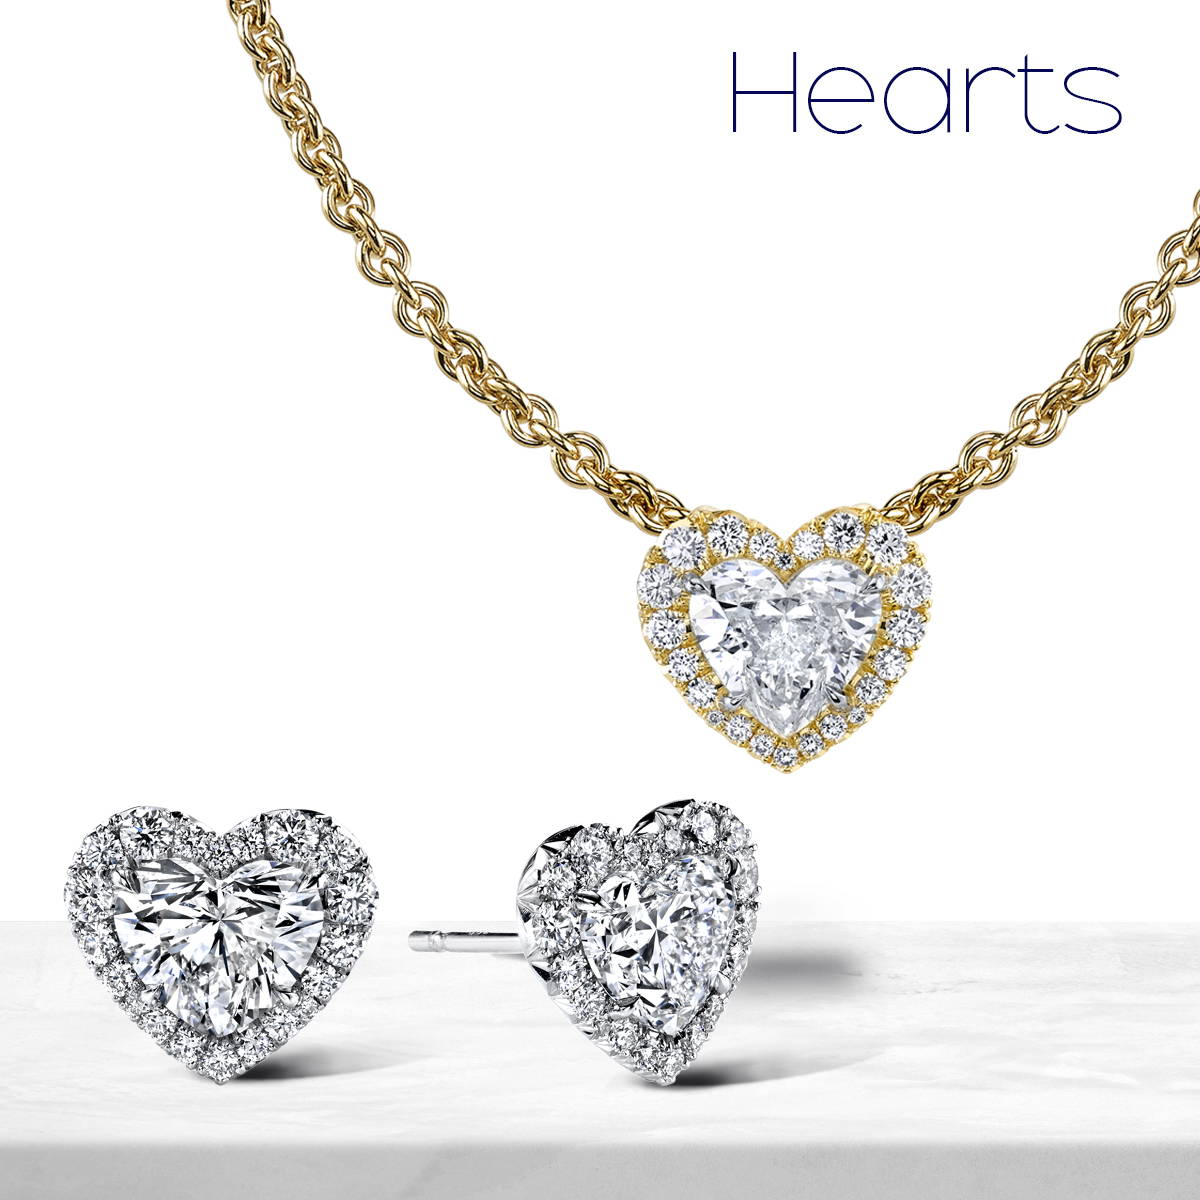 classic collection heart shaped diamond and gemstone necklace and earrings